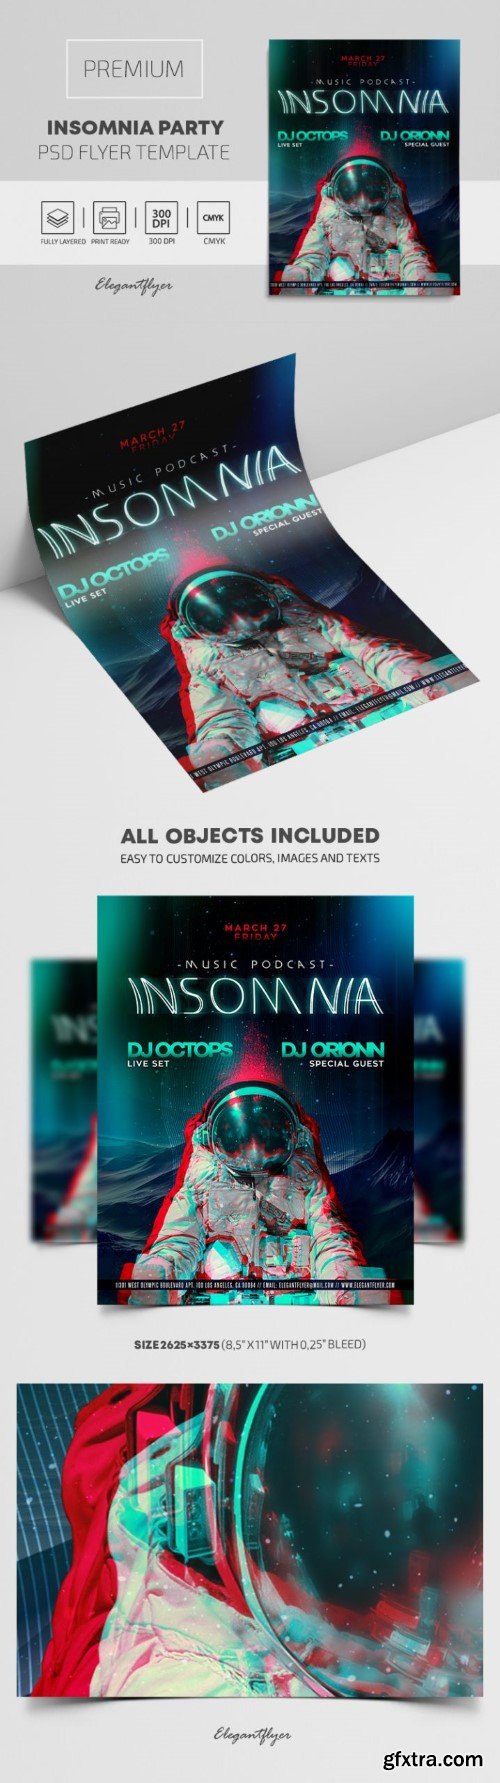 Insomnia Party – Premium PSD Flyer Template